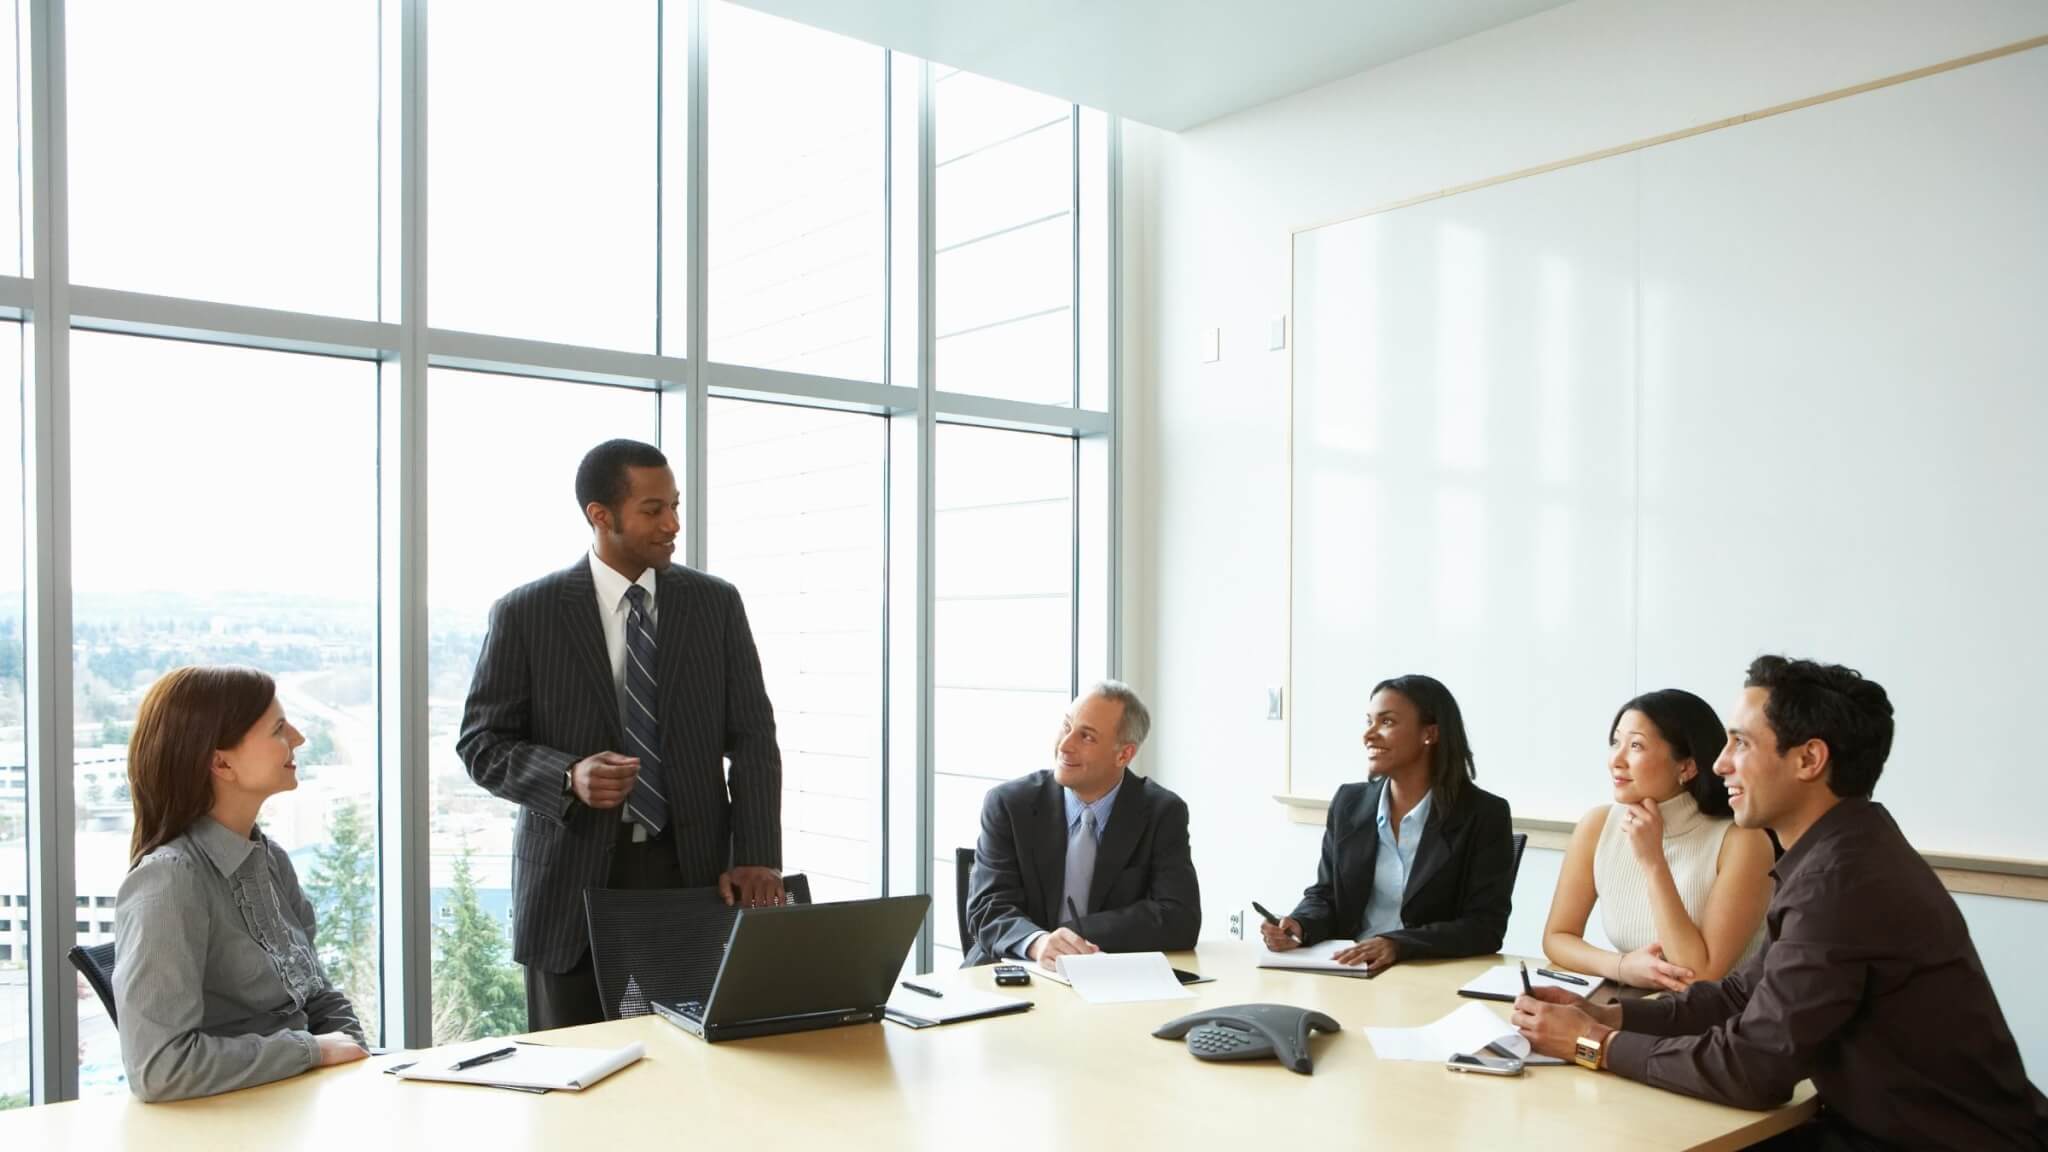 Executive Meeting Agenda: 6 Pro Tips to Lead a Successful Leadership Meeting